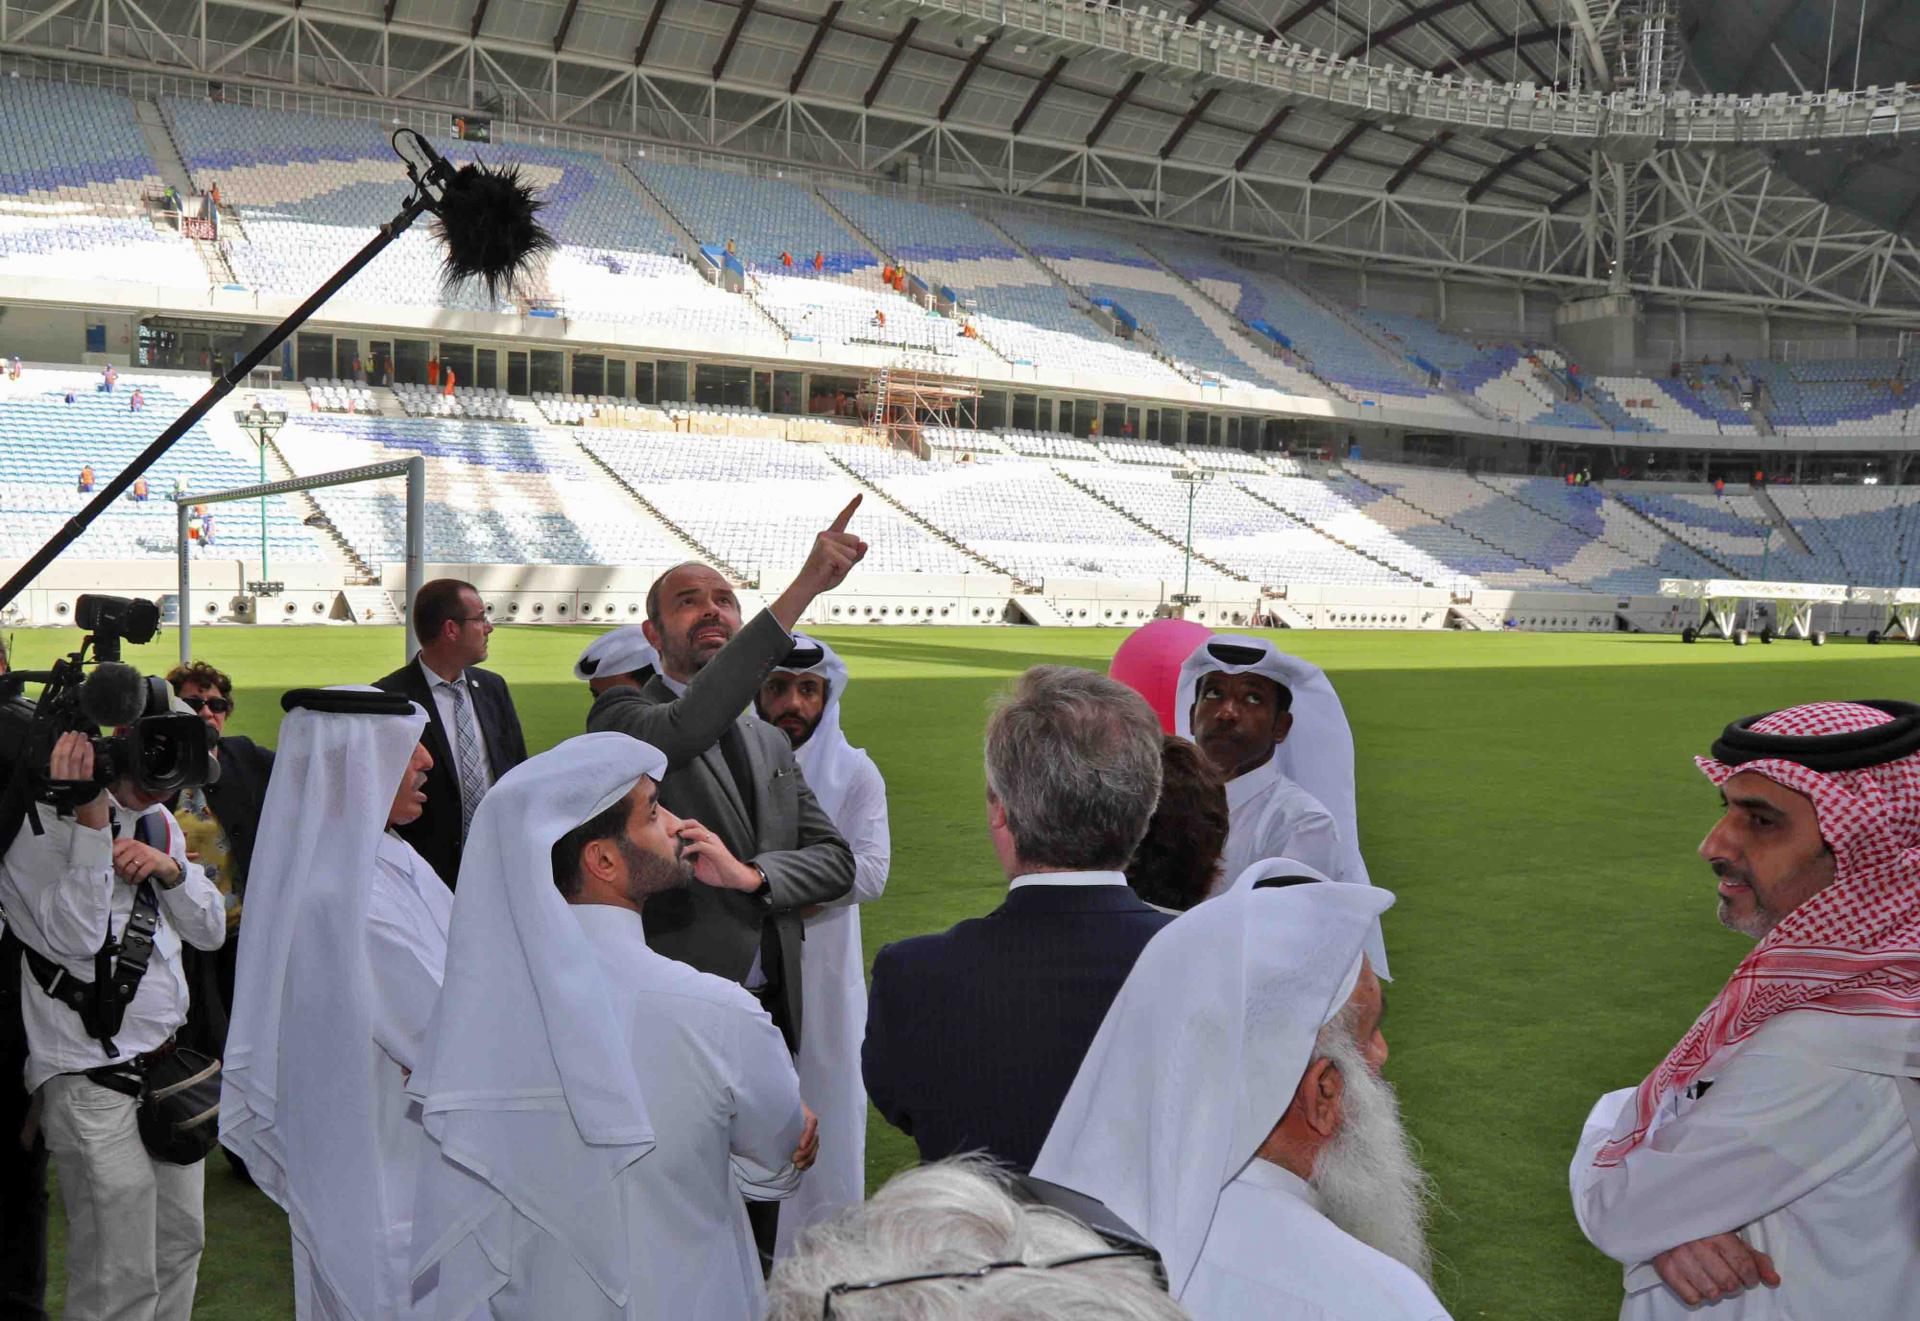 Organisers of the 2022 Qatar World Cup said on Saturday that "there will be no decision imposed" on the country to expand